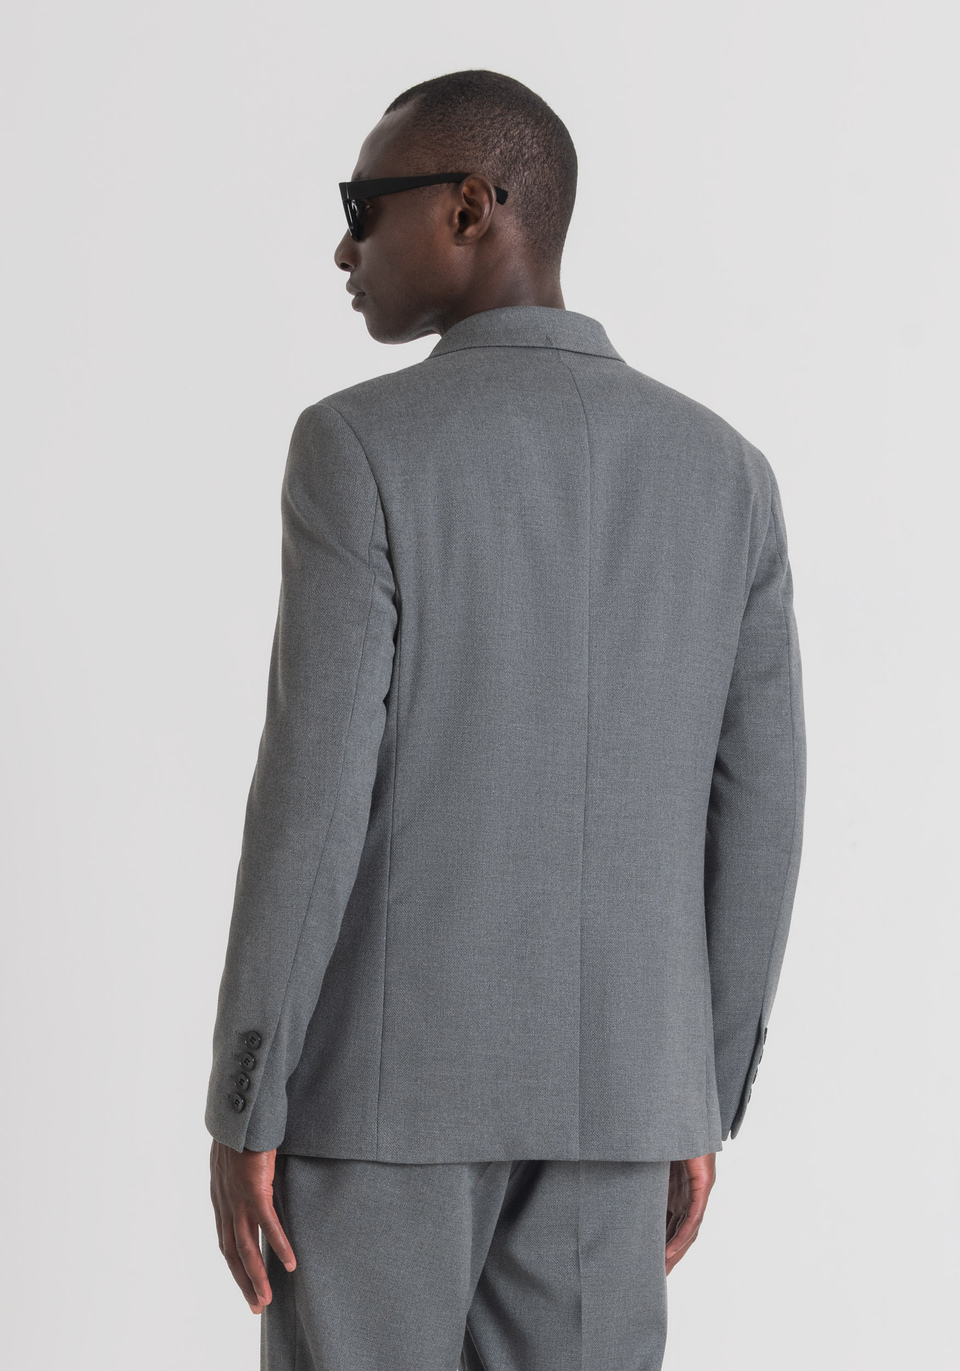 "ROGER" REGULAR-FIT DOUBLE-BREASTED JACKET IN TWILL - Antony Morato Online Shop